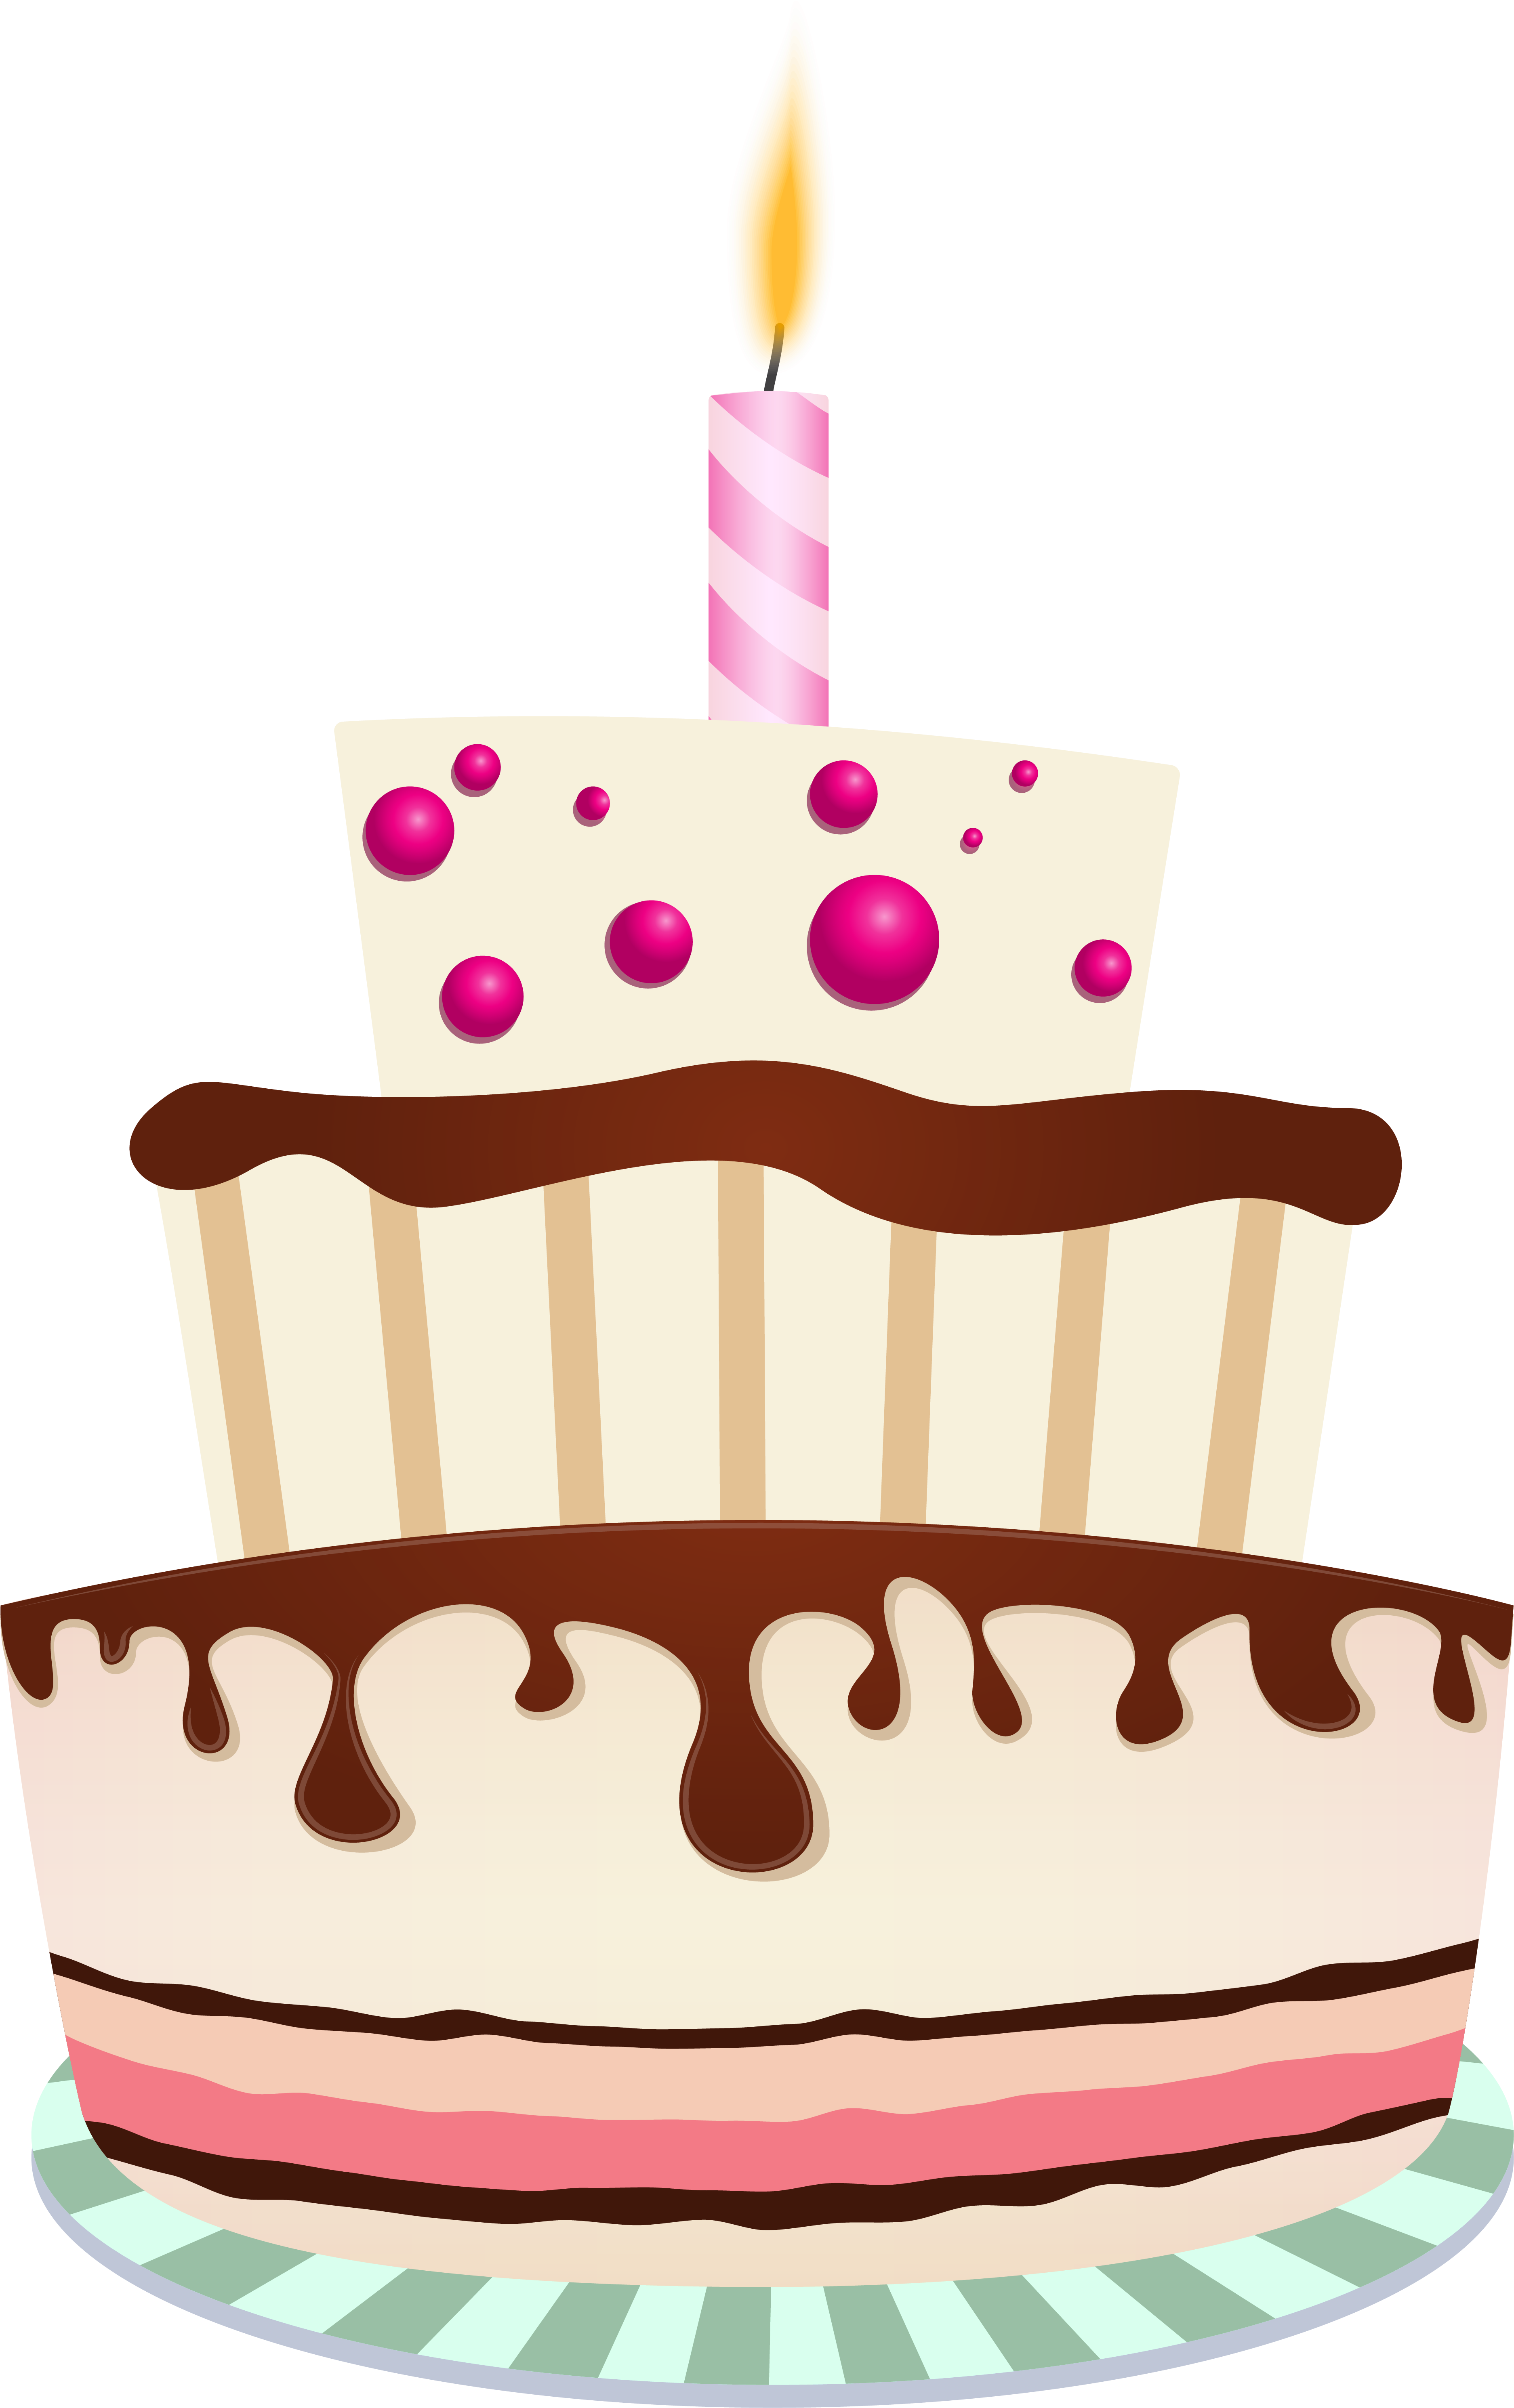 Birthday Cake Candle Celebration Graphic PNG